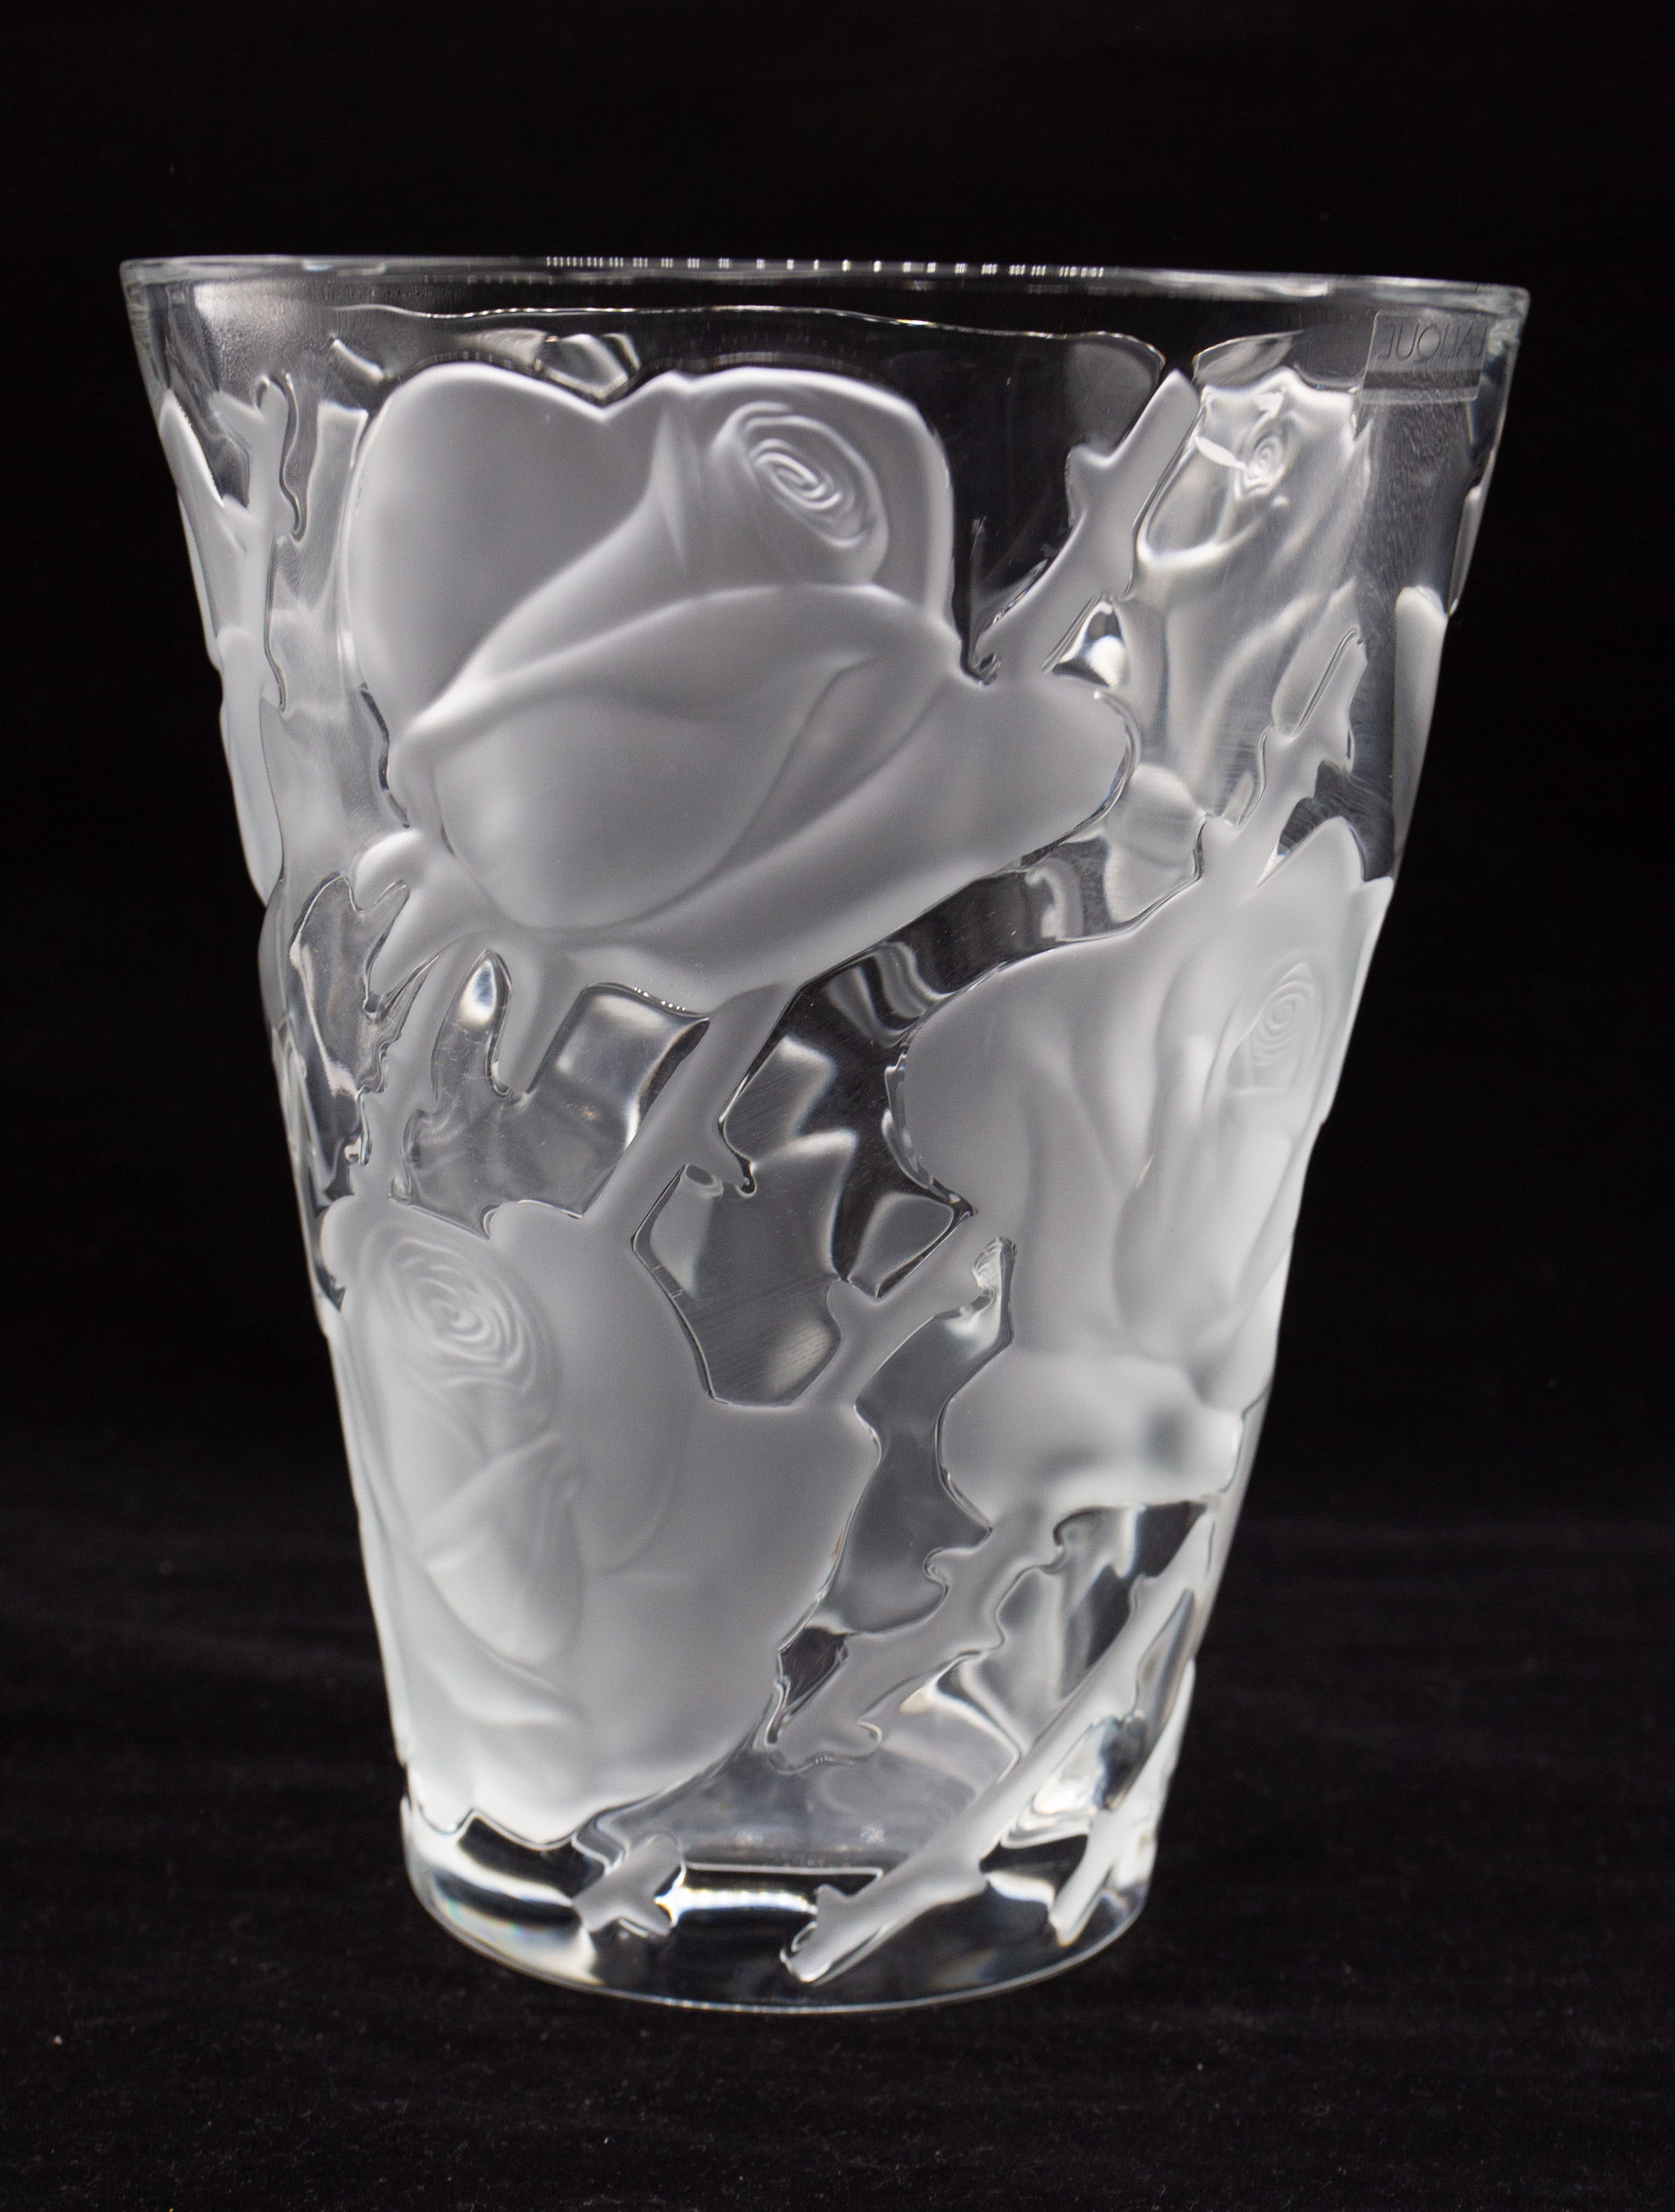 Lalique - A large bucket shaped vase, having frosted roses and foliage design, circa mid 1990s, with